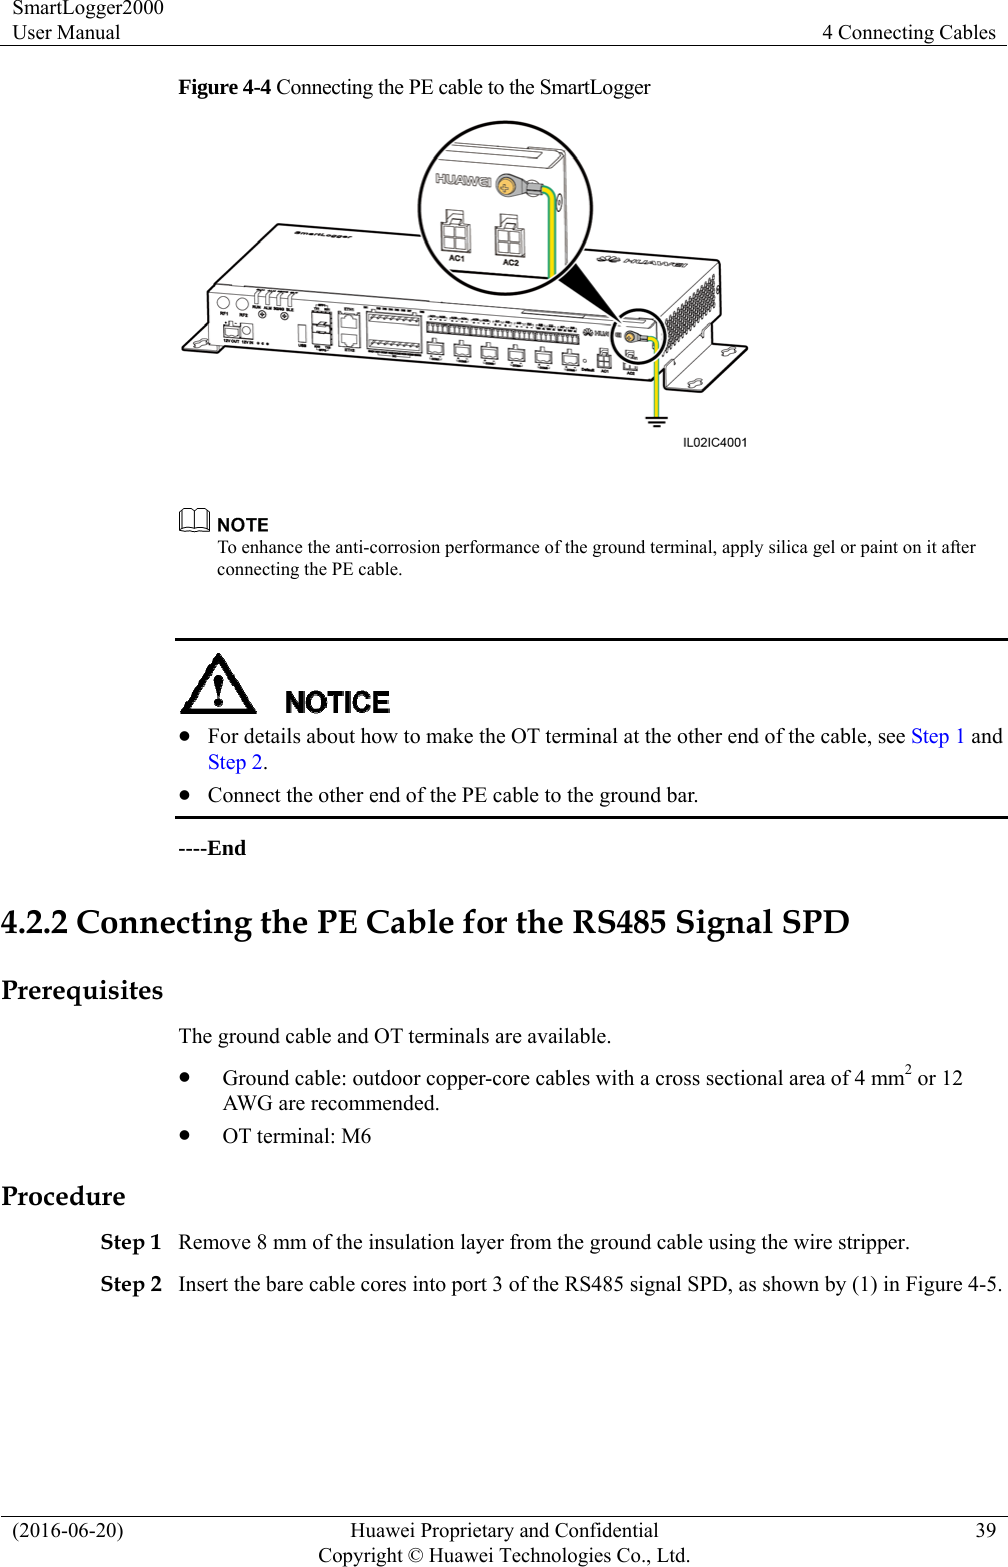 SmartLogger2000 User Manual  4 Connecting Cables (2016-06-20)  Huawei Proprietary and Confidential         Copyright © Huawei Technologies Co., Ltd.39 Figure 4-4 Connecting the PE cable to the SmartLogger    To enhance the anti-corrosion performance of the ground terminal, apply silica gel or paint on it after connecting the PE cable.      For details about how to make the OT terminal at the other end of the cable, see Step 1 and Step 2.   Connect the other end of the PE cable to the ground bar. ----End 4.2.2 Connecting the PE Cable for the RS485 Signal SPD Prerequisites The ground cable and OT terminals are available.  Ground cable: outdoor copper-core cables with a cross sectional area of 4 mm2 or 12 AWG are recommended.  OT terminal: M6 Procedure Step 1 Remove 8 mm of the insulation layer from the ground cable using the wire stripper.   Step 2 Insert the bare cable cores into port 3 of the RS485 signal SPD, as shown by (1) in Figure 4-5. 